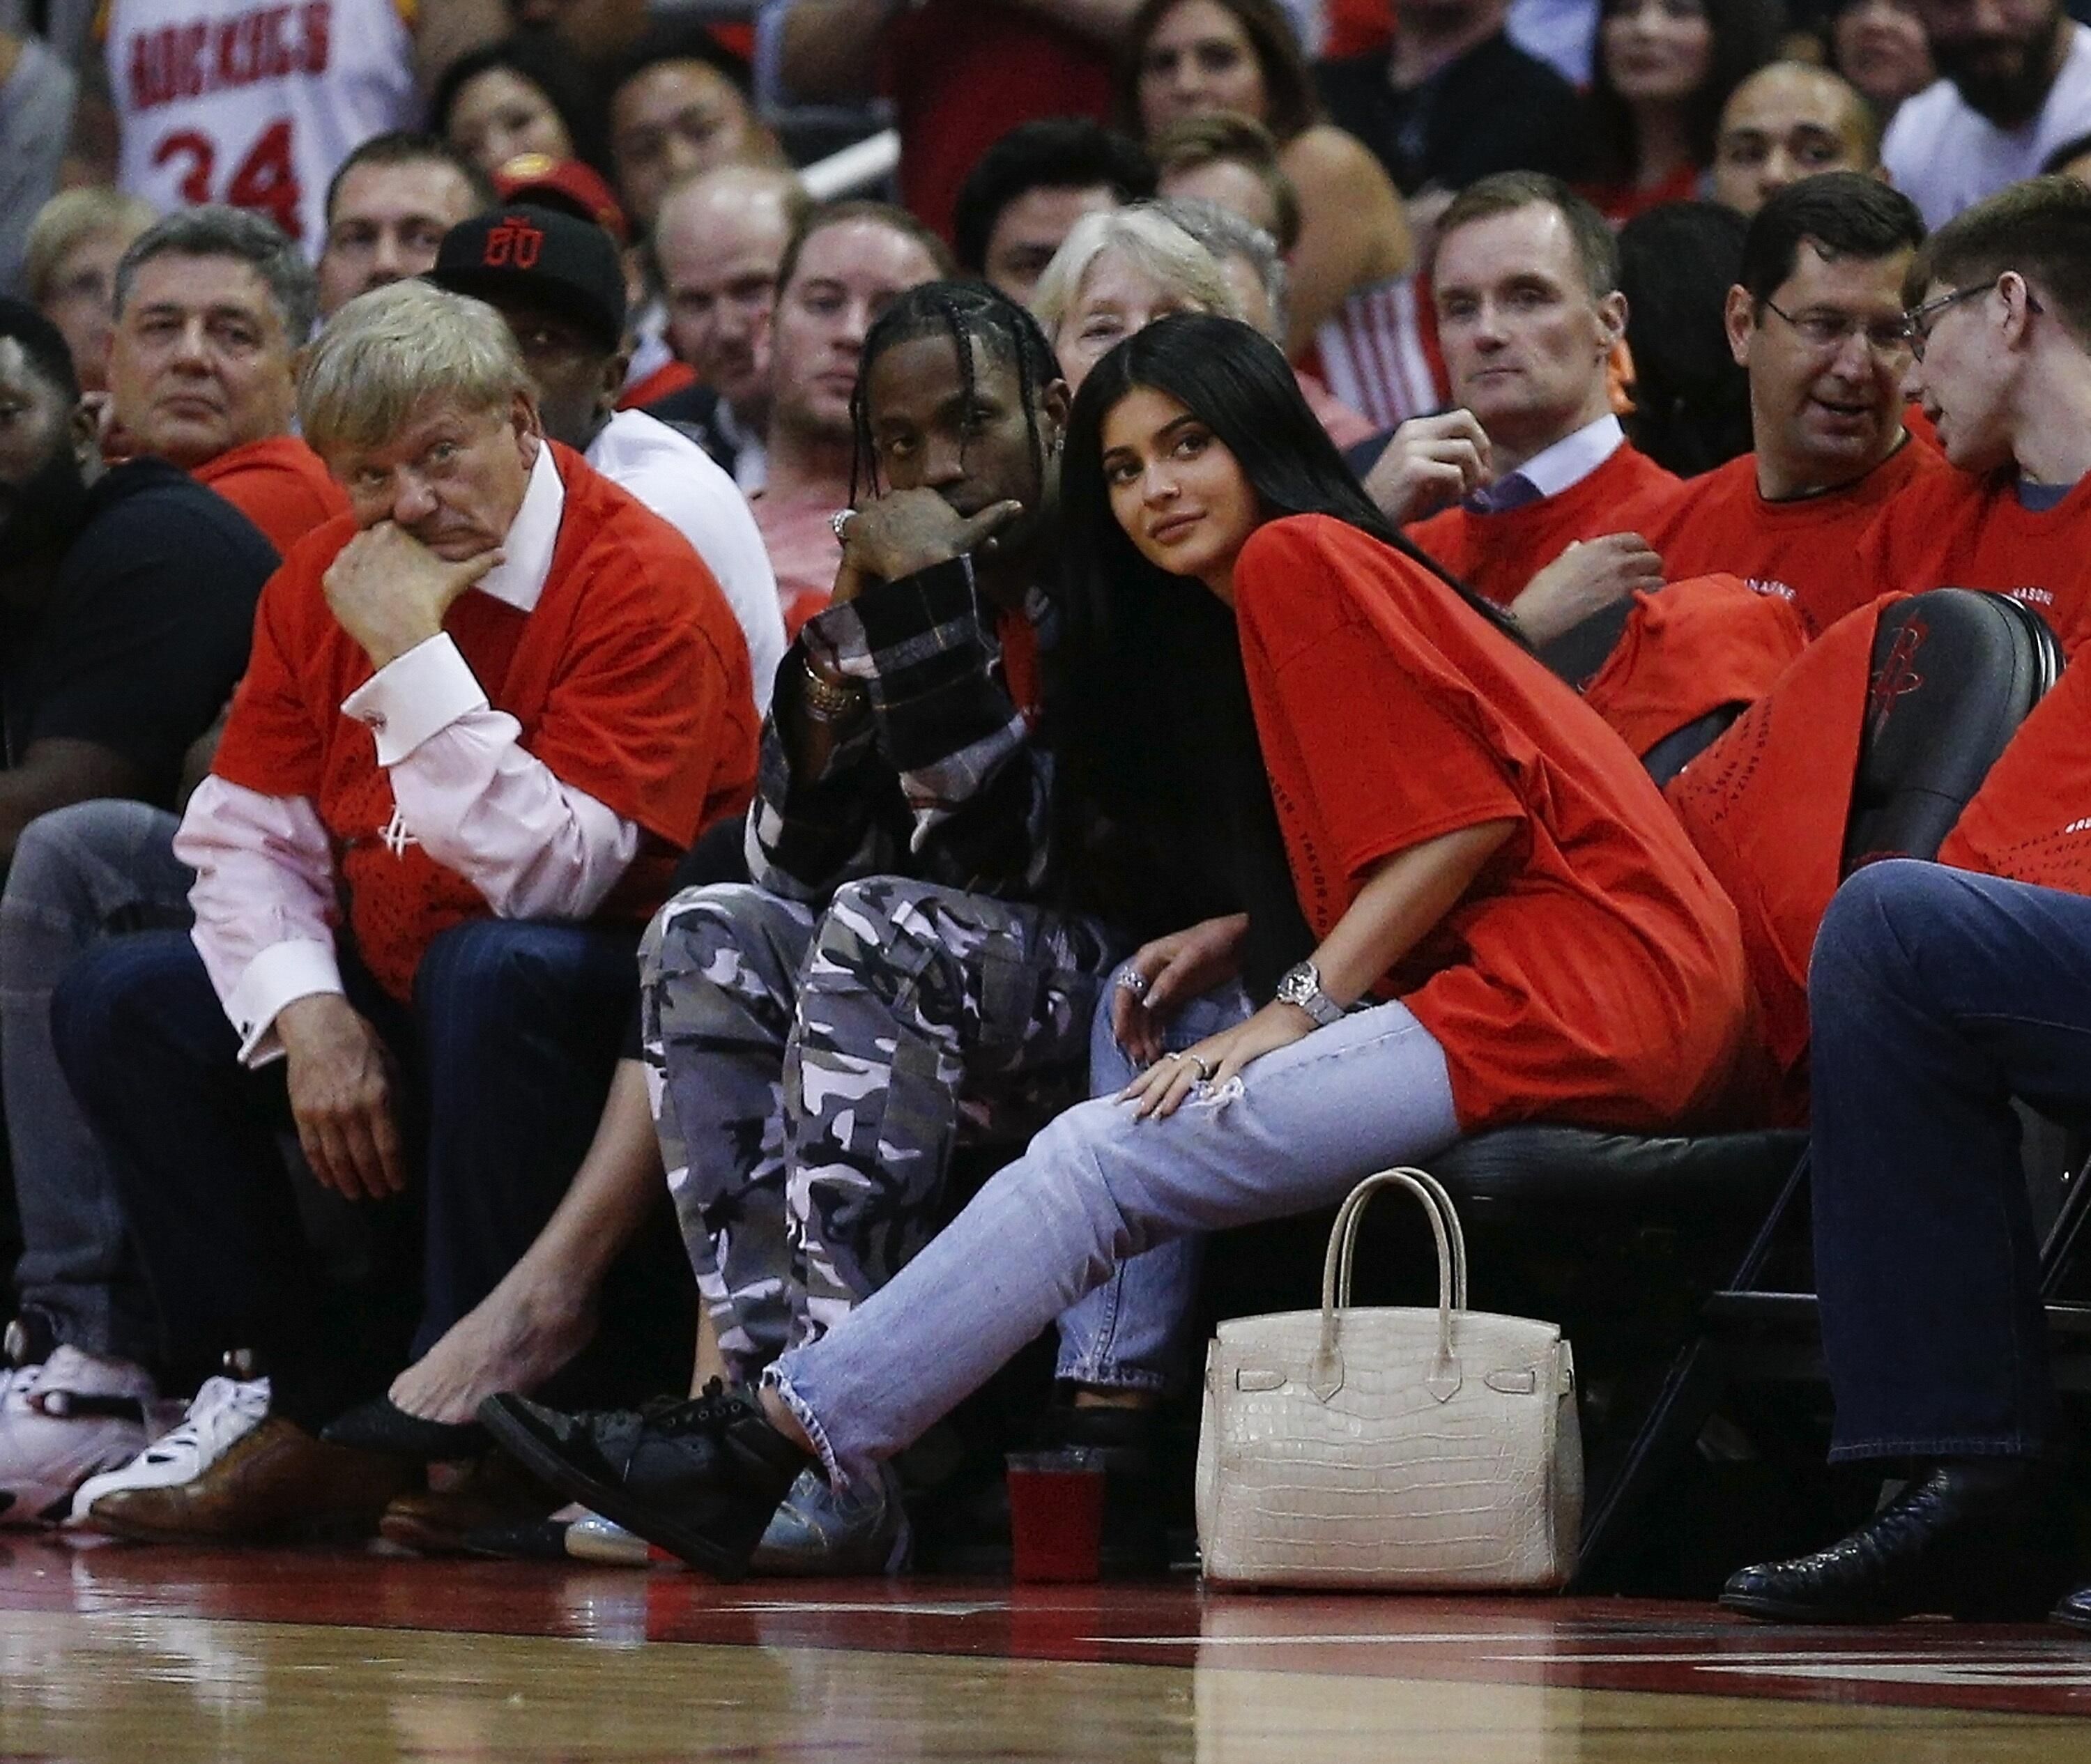 HOUSTON, TX - APRIL 25:  Houston rapper Travis Scott and Kylie Jenner watch courtside during Game Five of the Western Conference Quarterfinals game of the 2017 NBA Playoffs at Toyota Center on April 25, 2017 in Houston, Texas. NOTE TO USER: User expressly